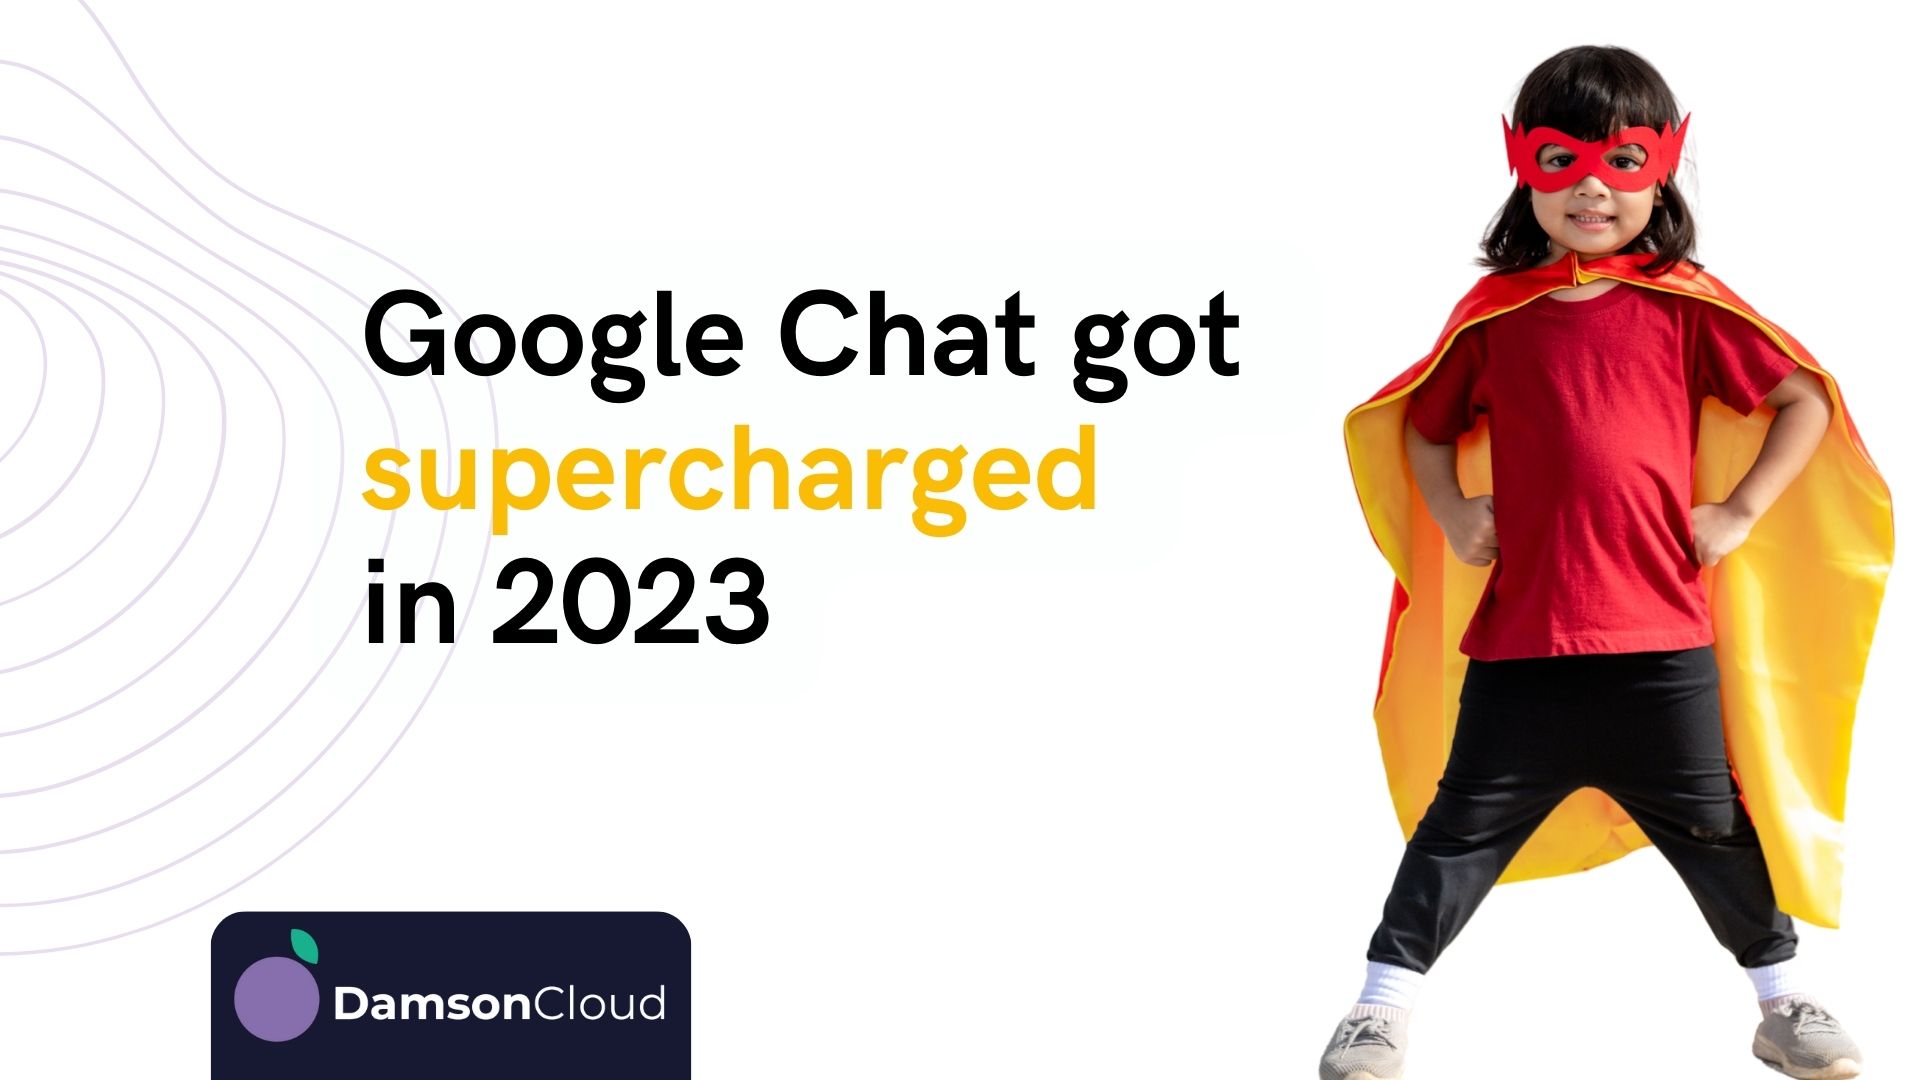 Google Chat just got SUPERCHARGED